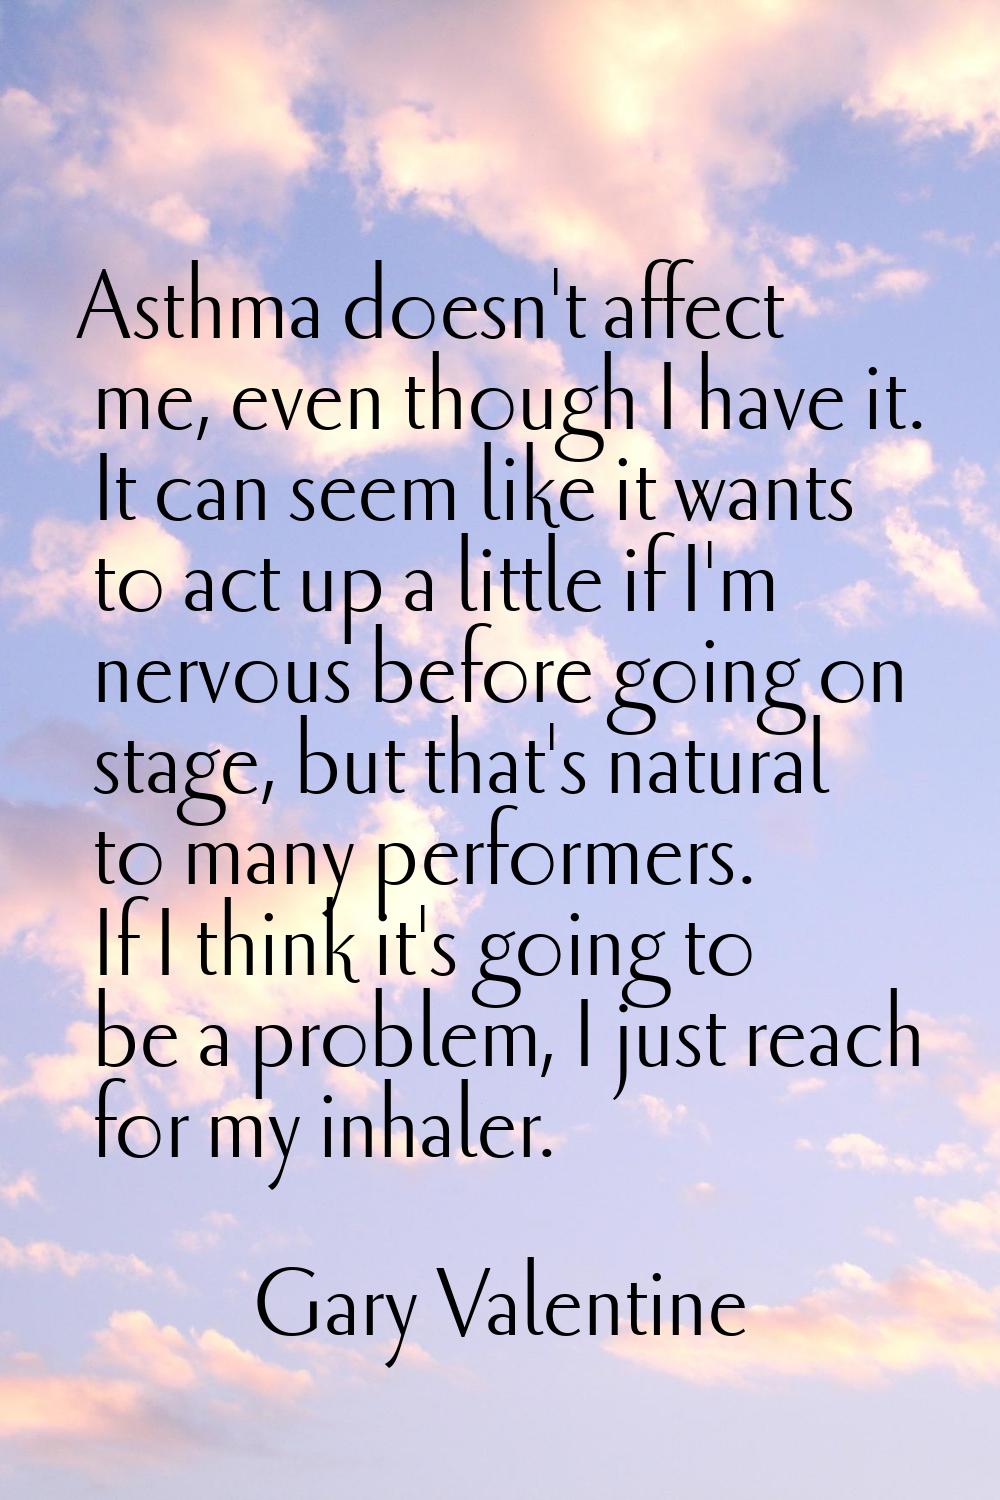 Asthma doesn't affect me, even though I have it. It can seem like it wants to act up a little if I'